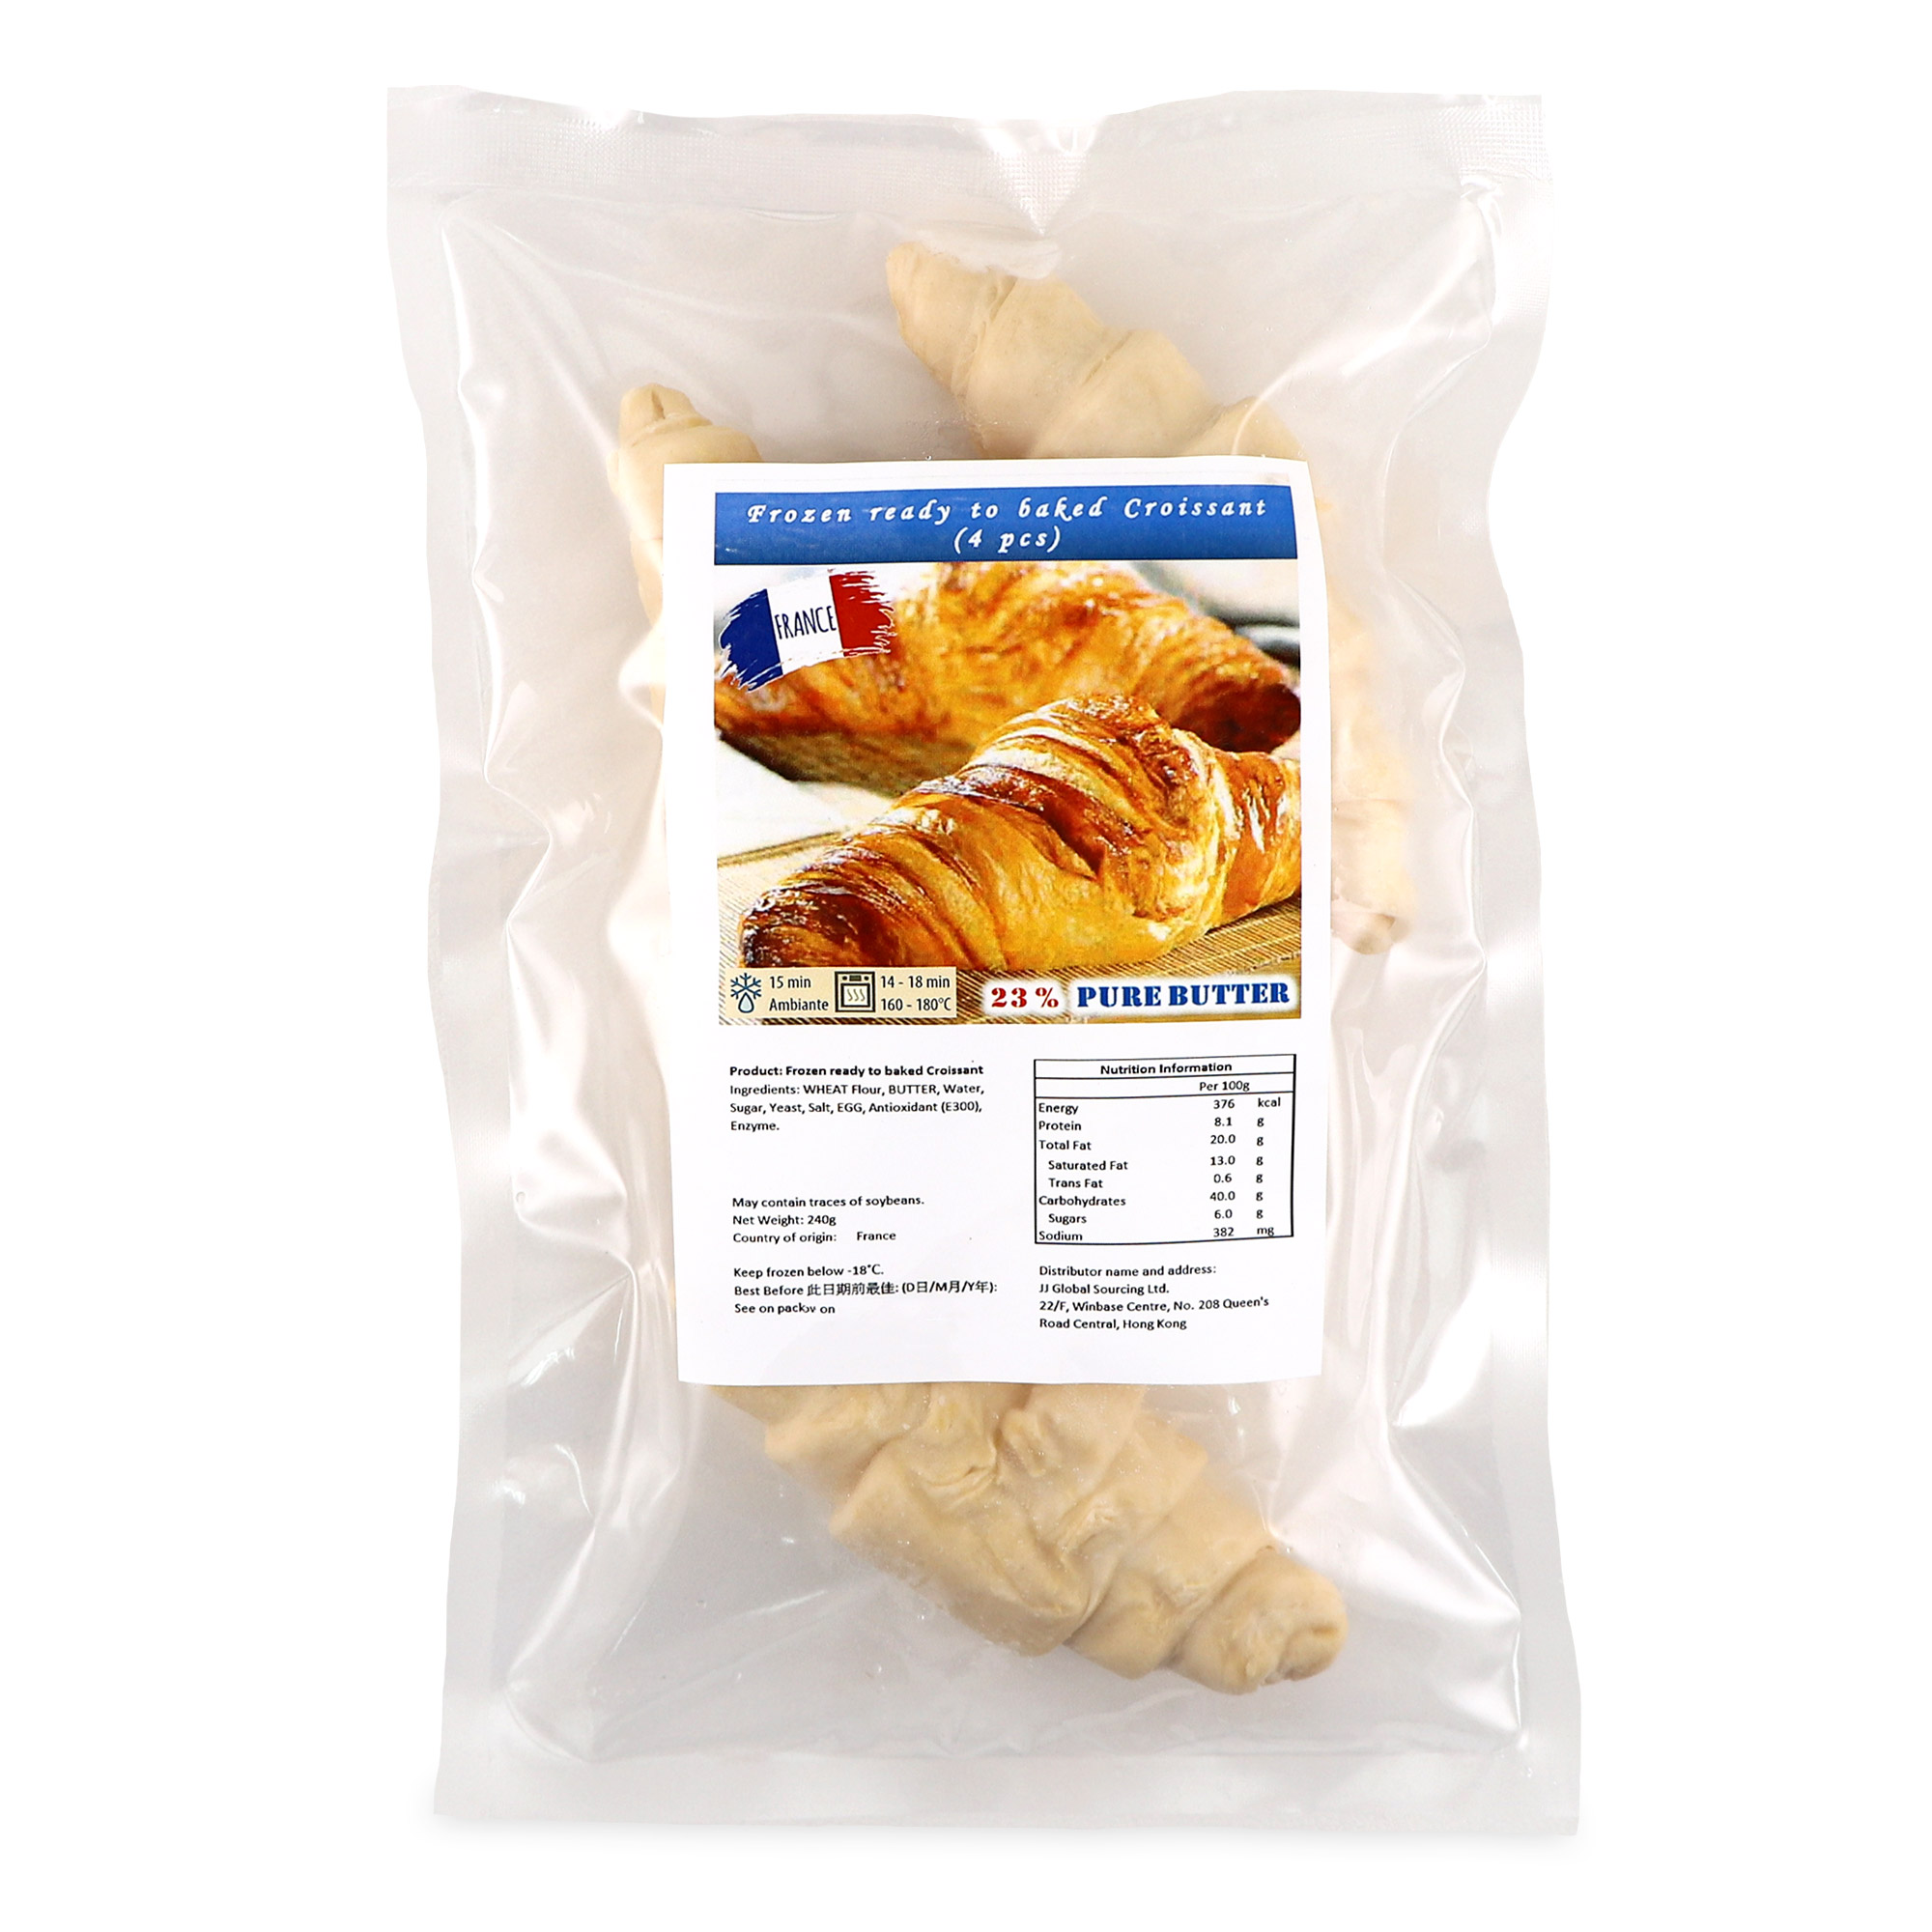 Frozen Ready to Bake Croissant 4X60g - France*